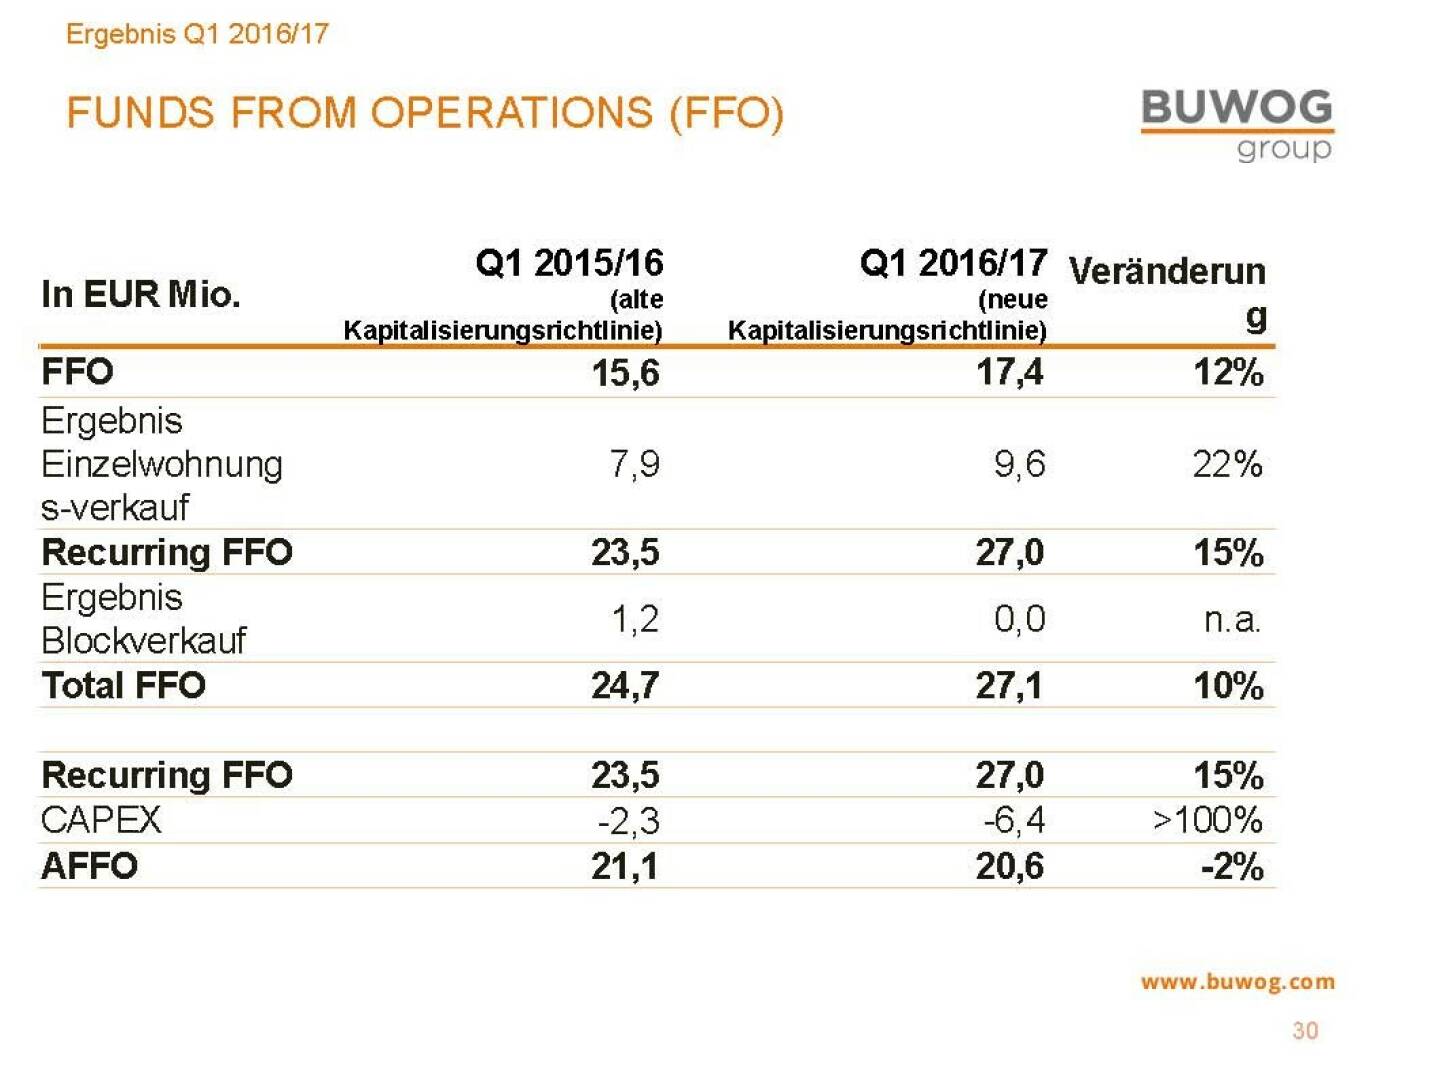 Buwog Group - Funds from Operations